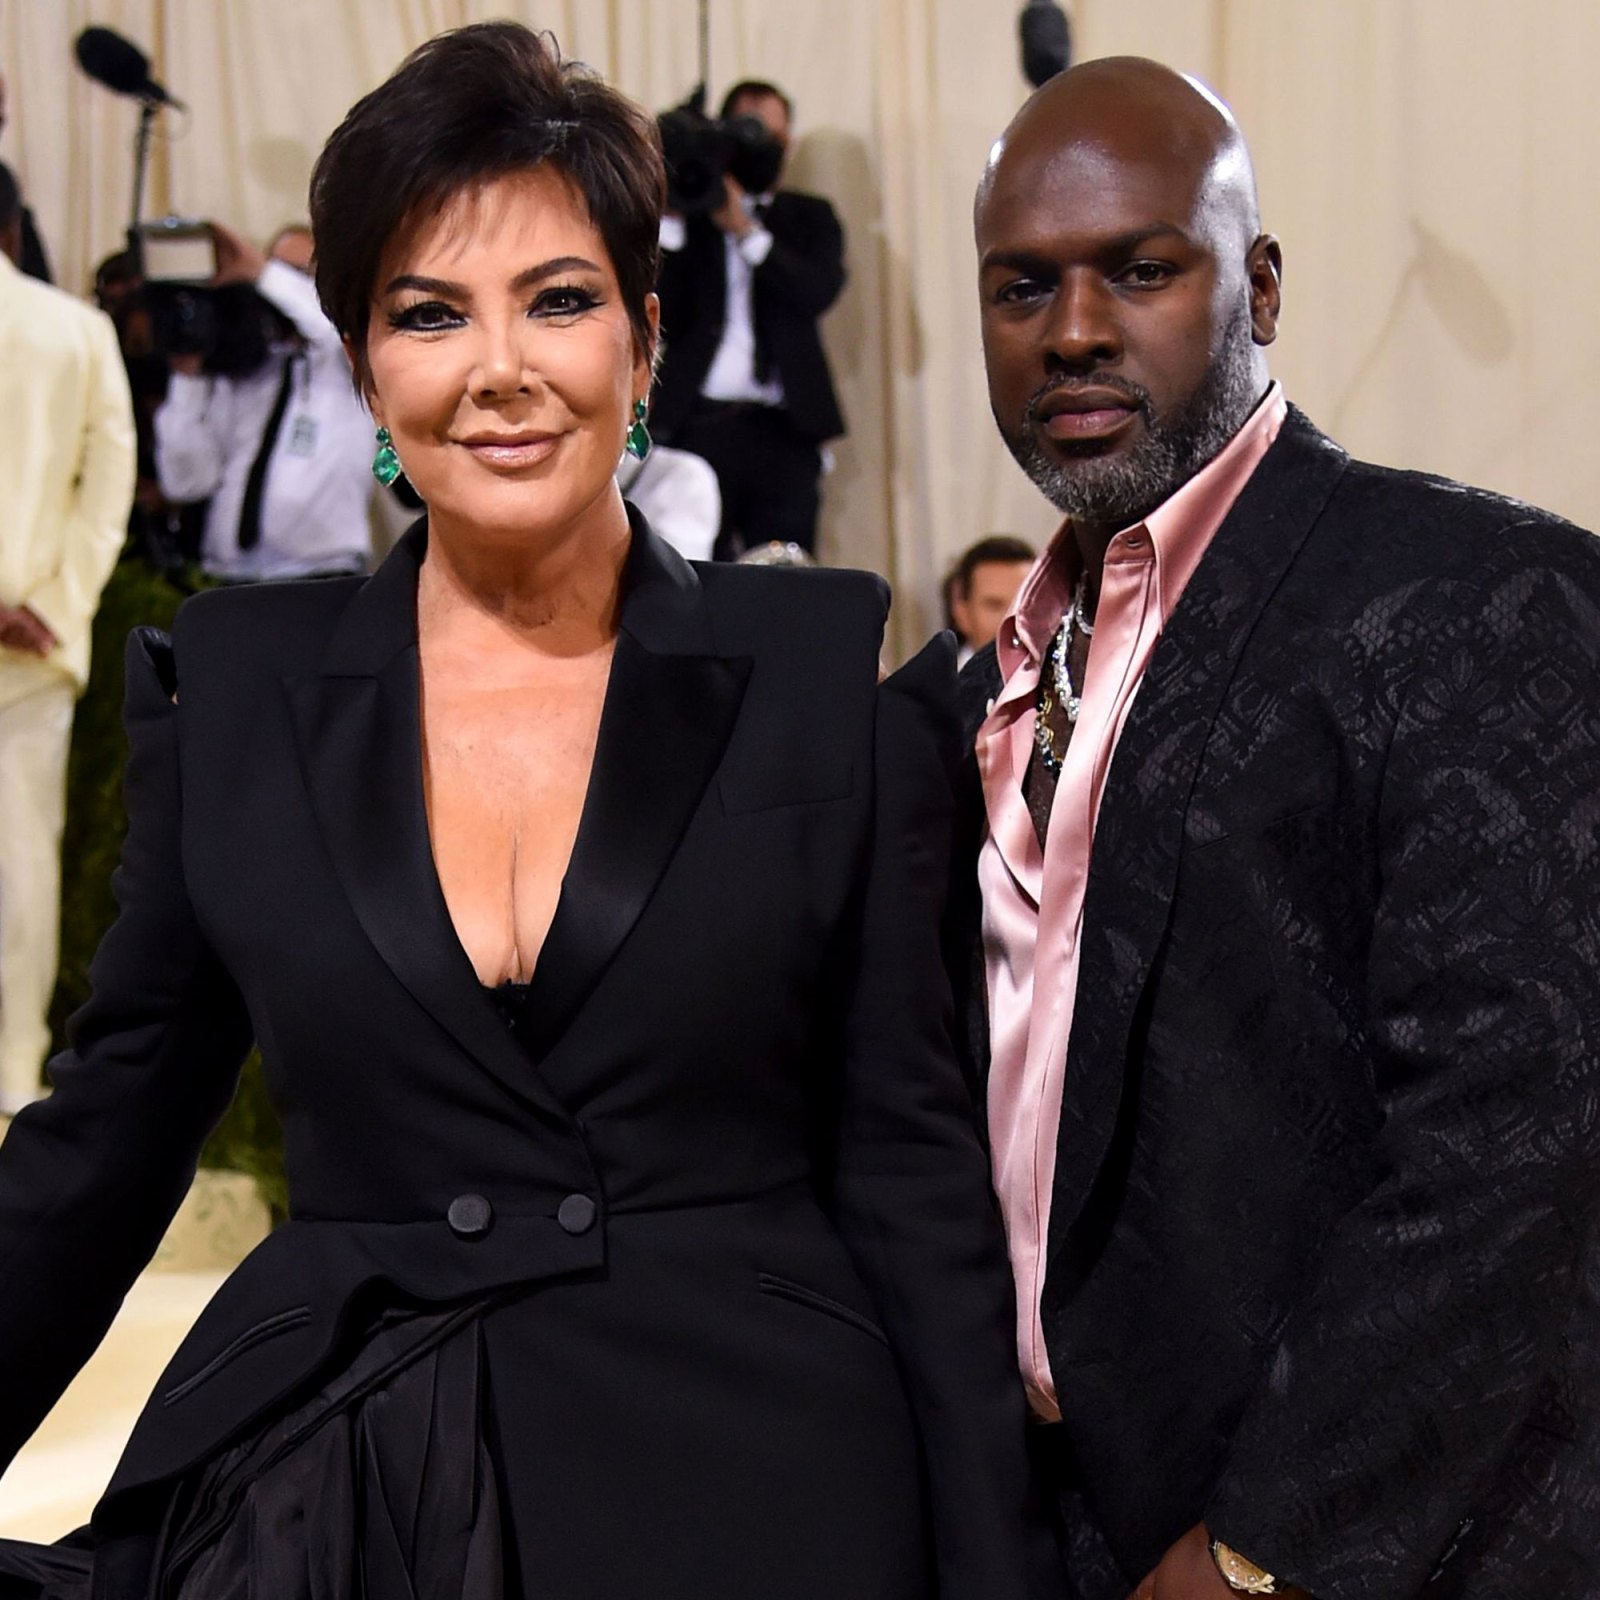 Gallery Update: Kris Jenner and Corey Gamble's Relationship Timeline